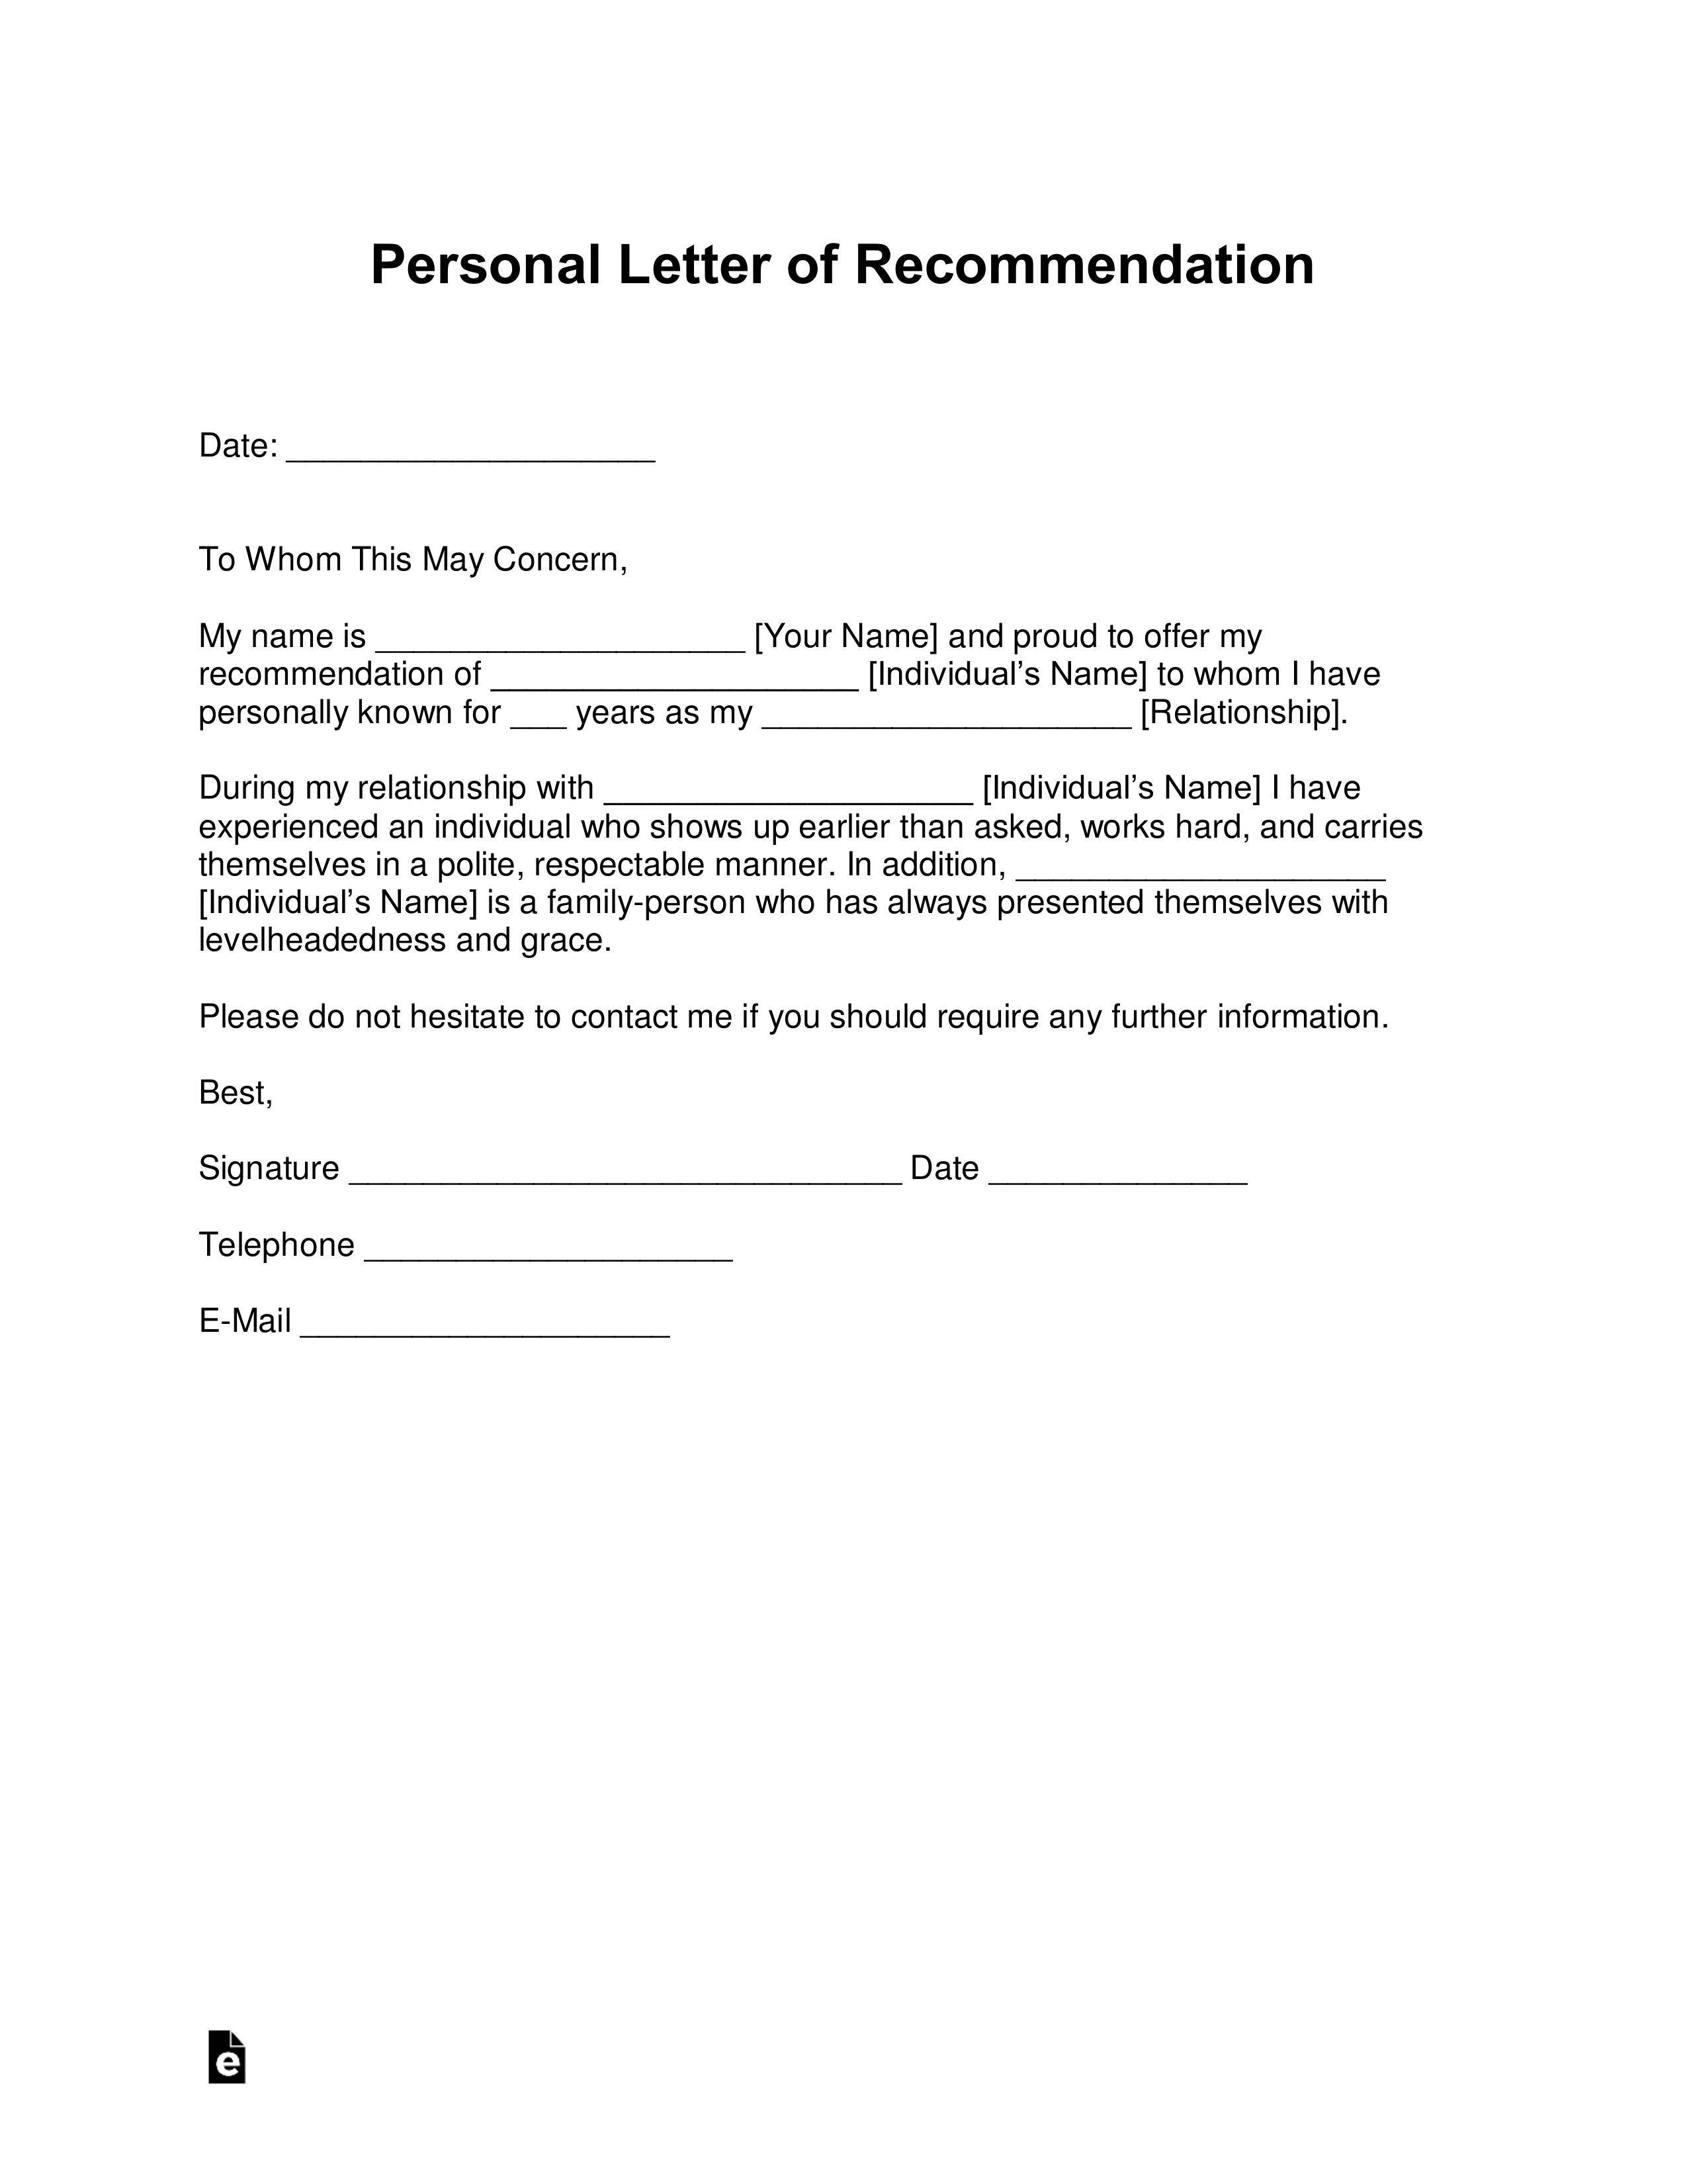 Immigration Reference Letter For A Friend from eforms.com